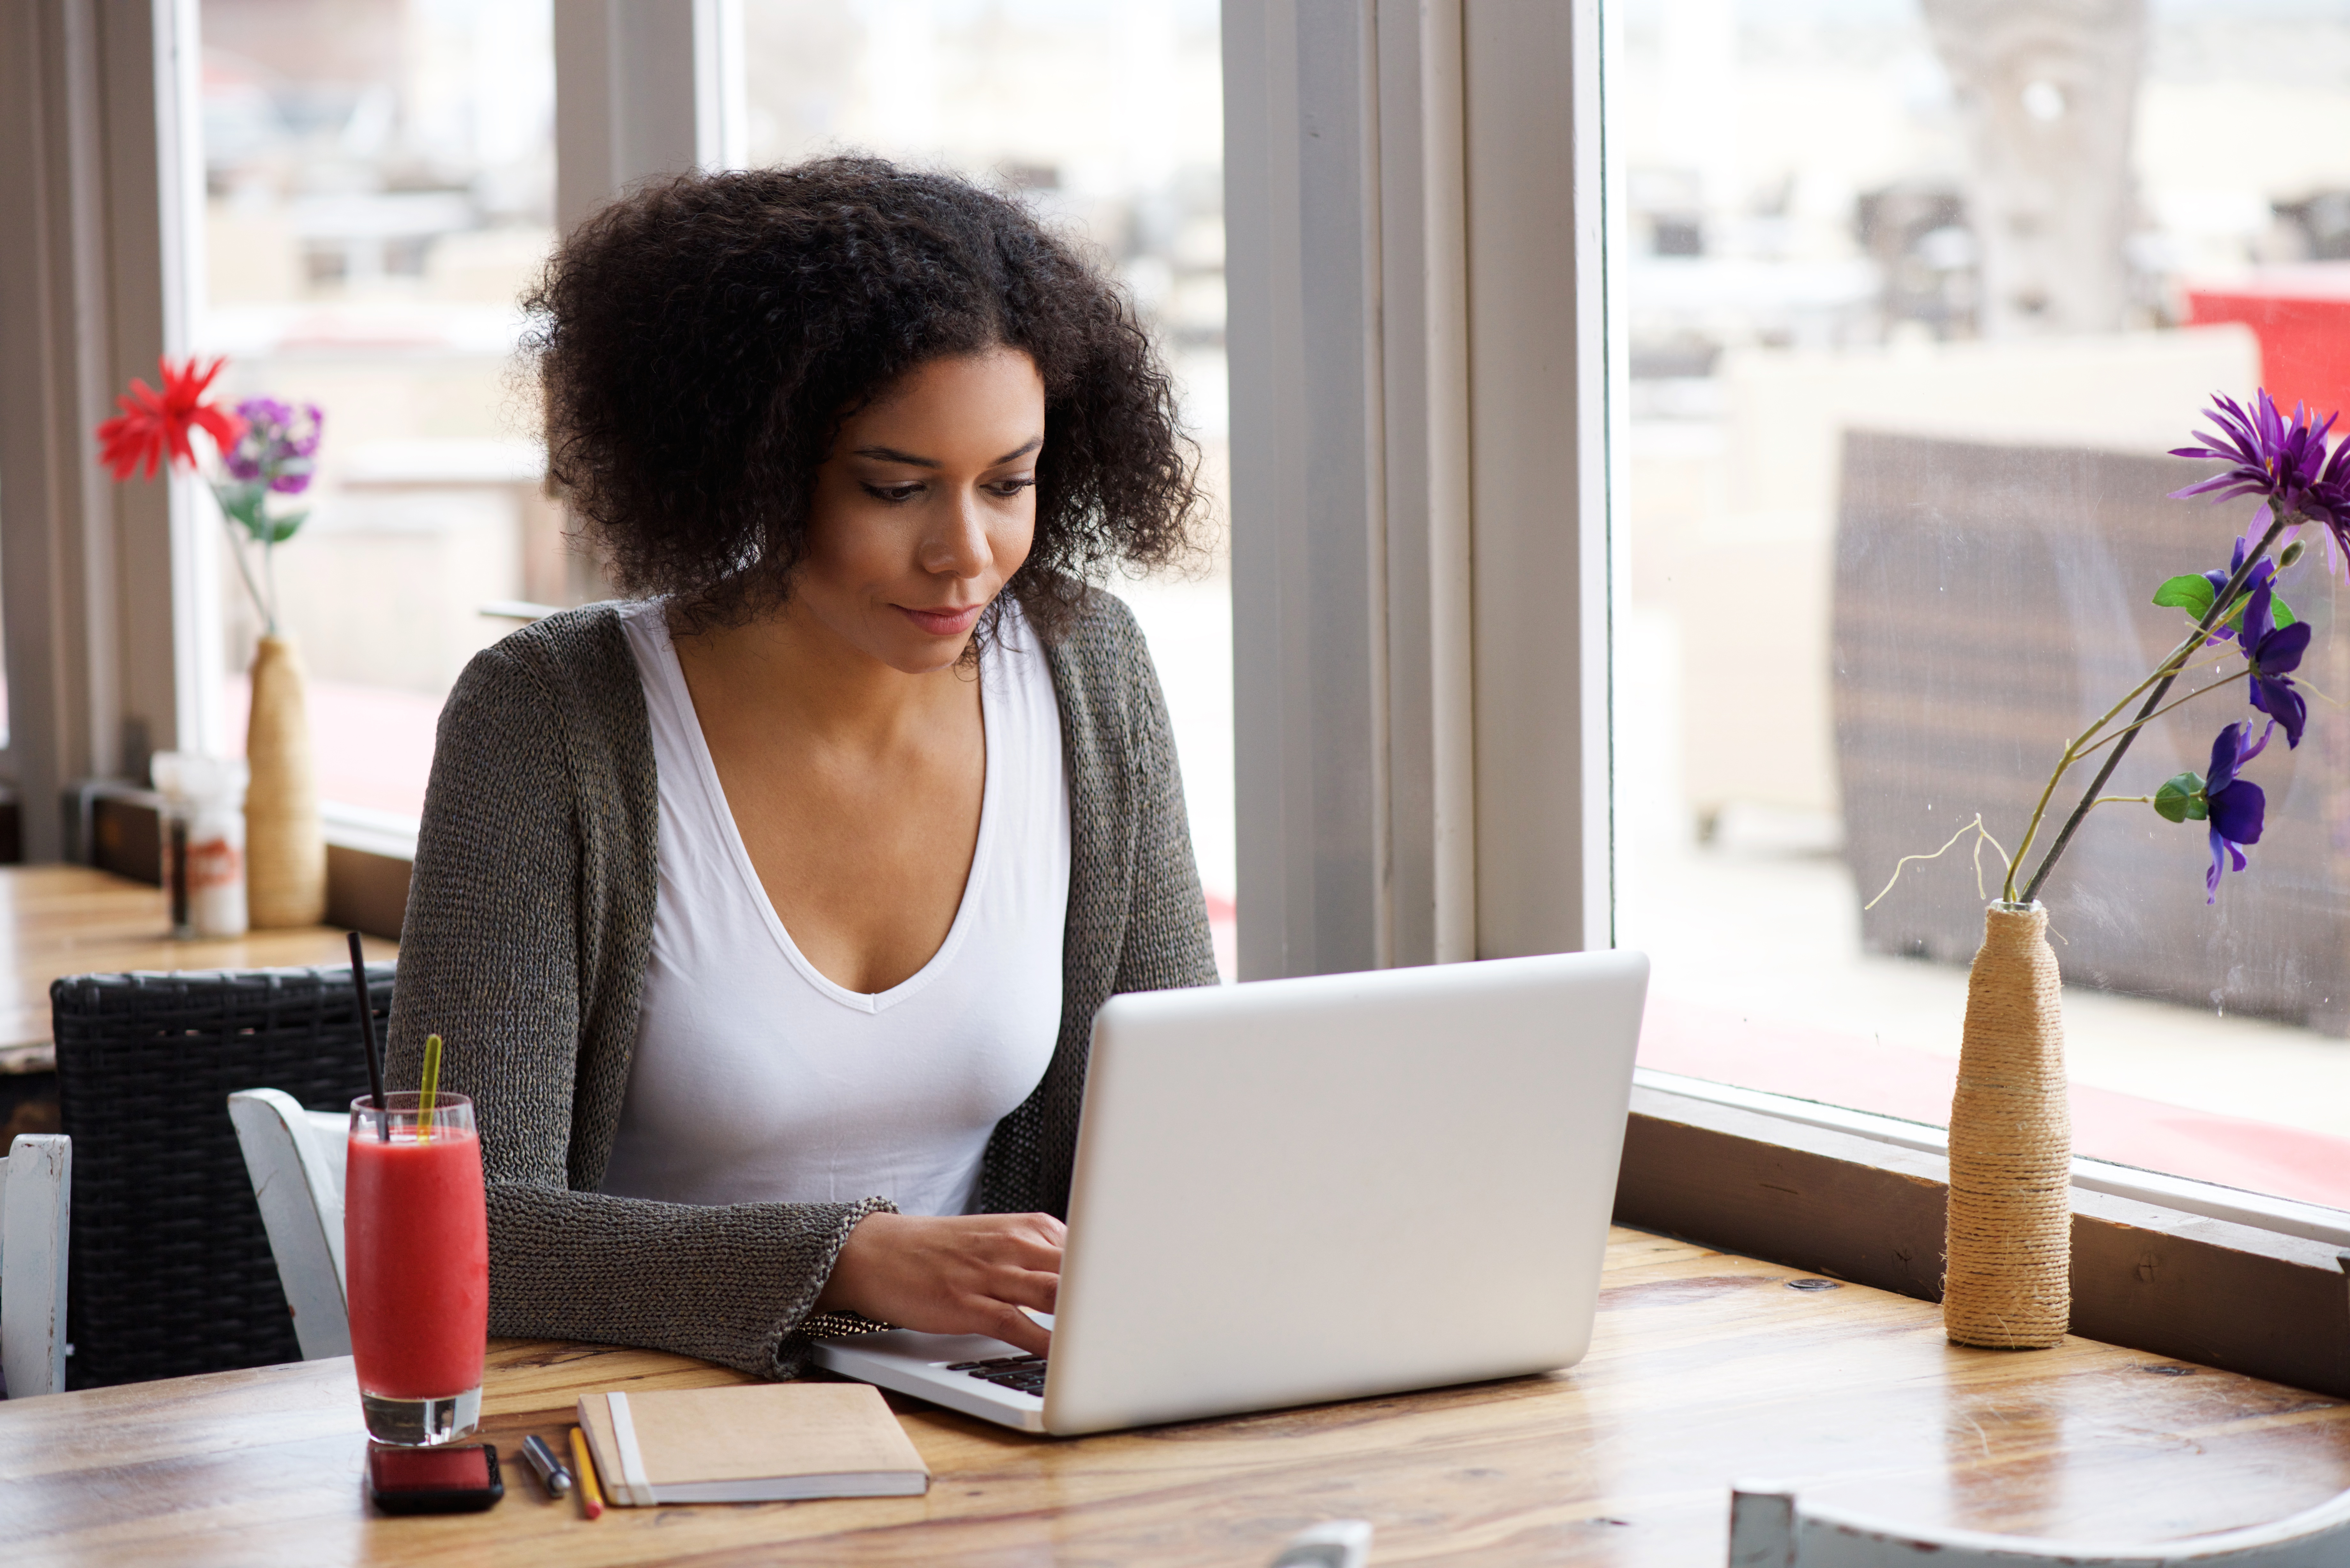 Blogging can help small business owners connect with customers